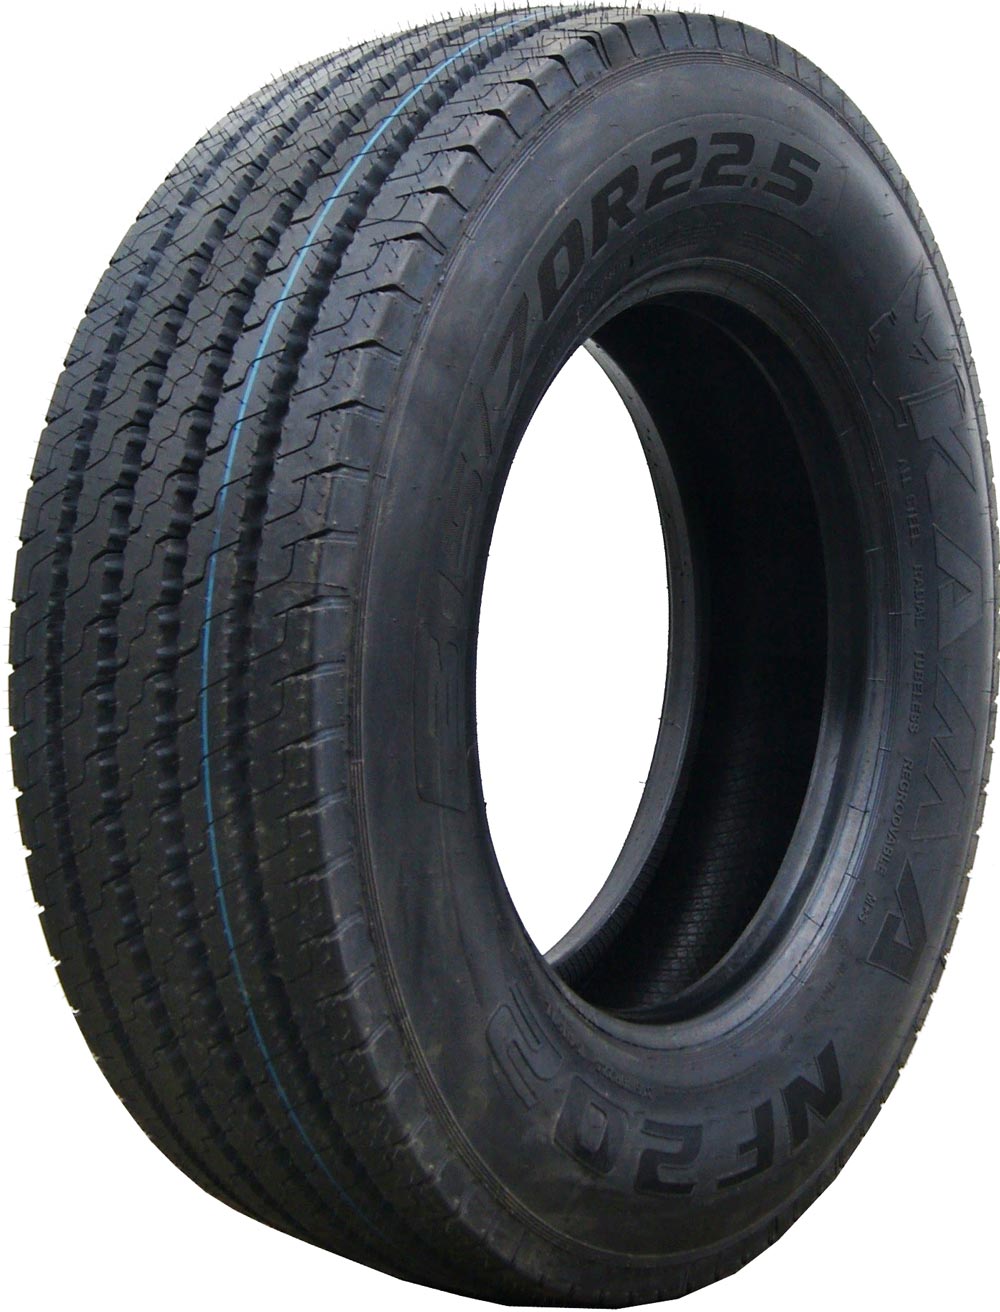 product_type-heavy_tires KAMA NF202 225/75 R17.5 129M